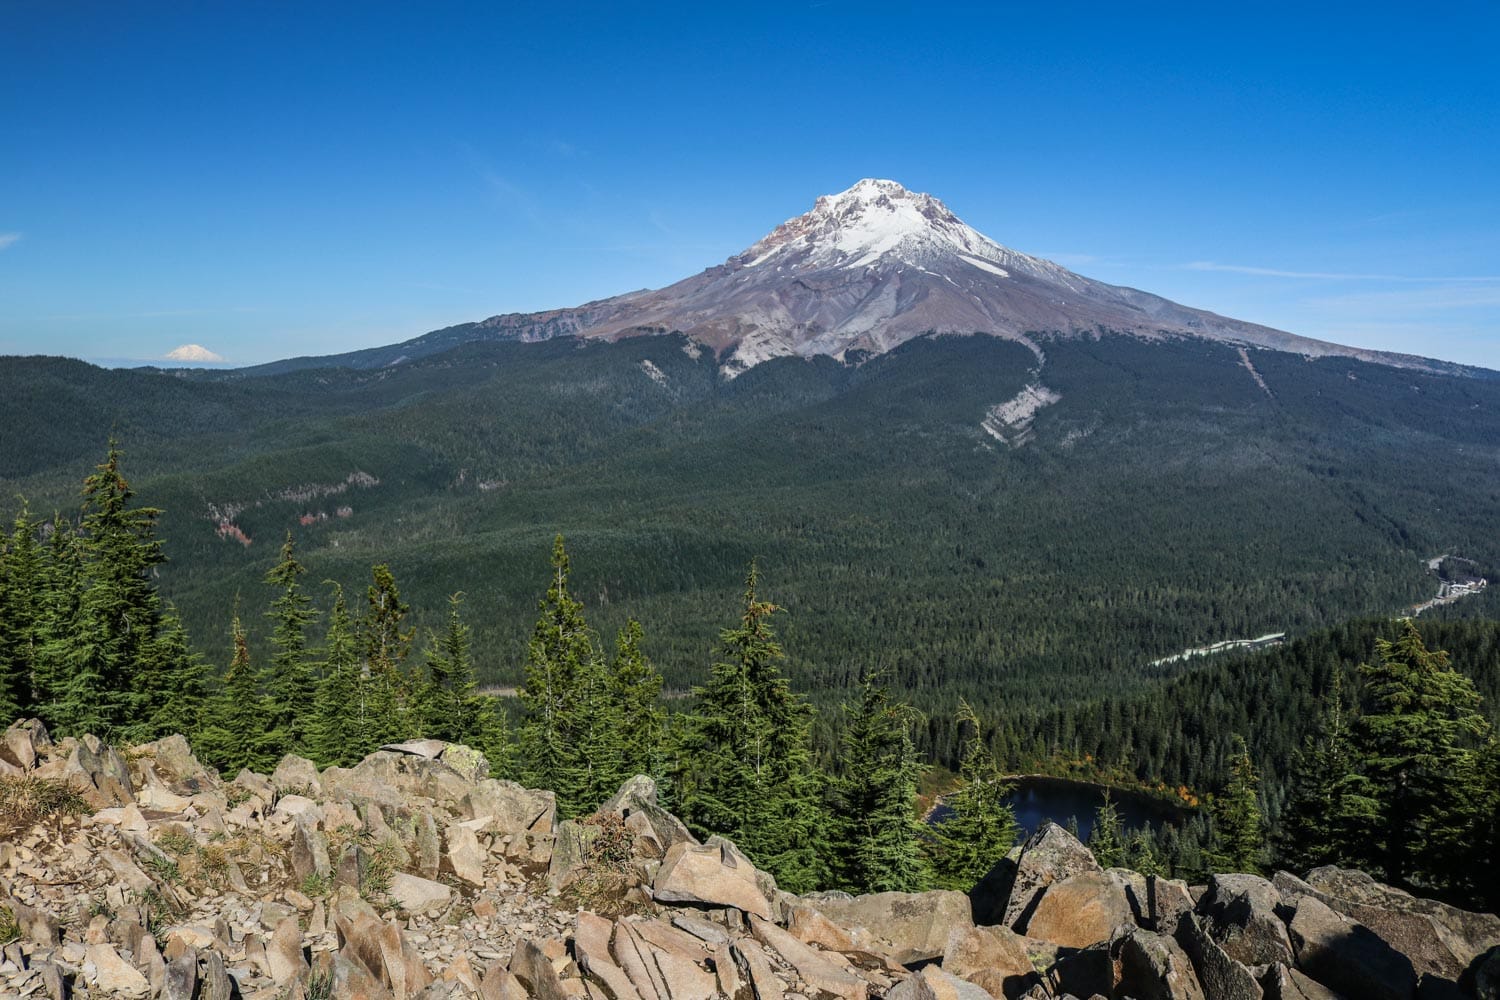 Mount Hood seen from Tom, Dick and Harry Mountain, Oregon